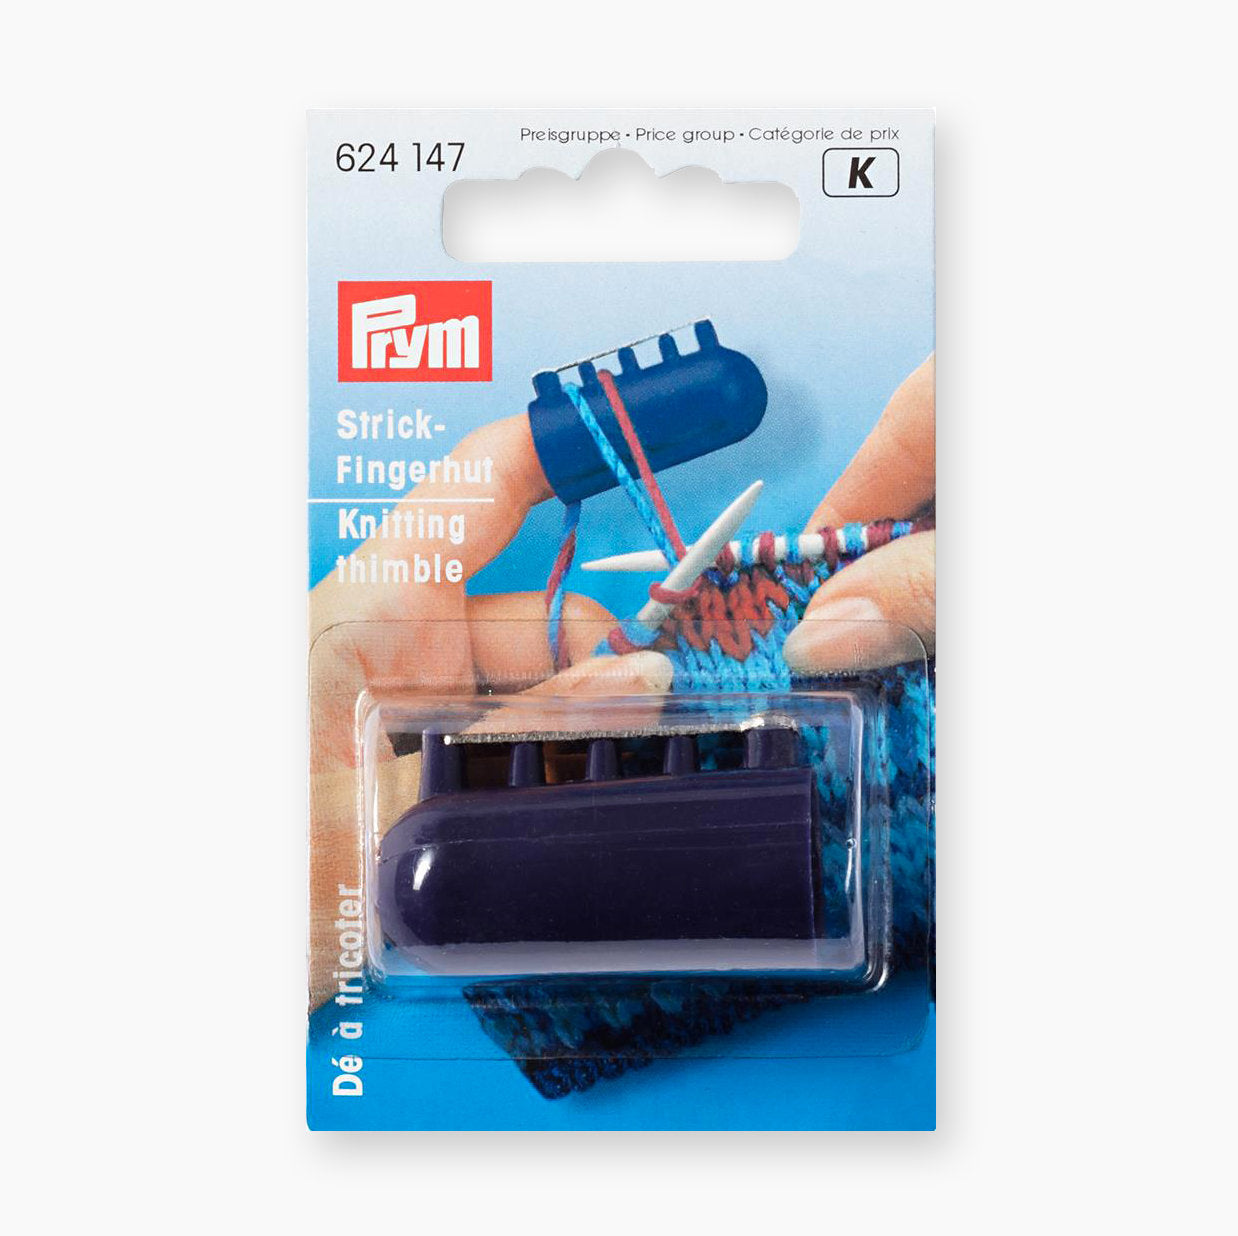 Thimble for Knitting with 4 Guides Prym 624147 to Work with Multiple Strands of Wool - Avoid tangles and mess!